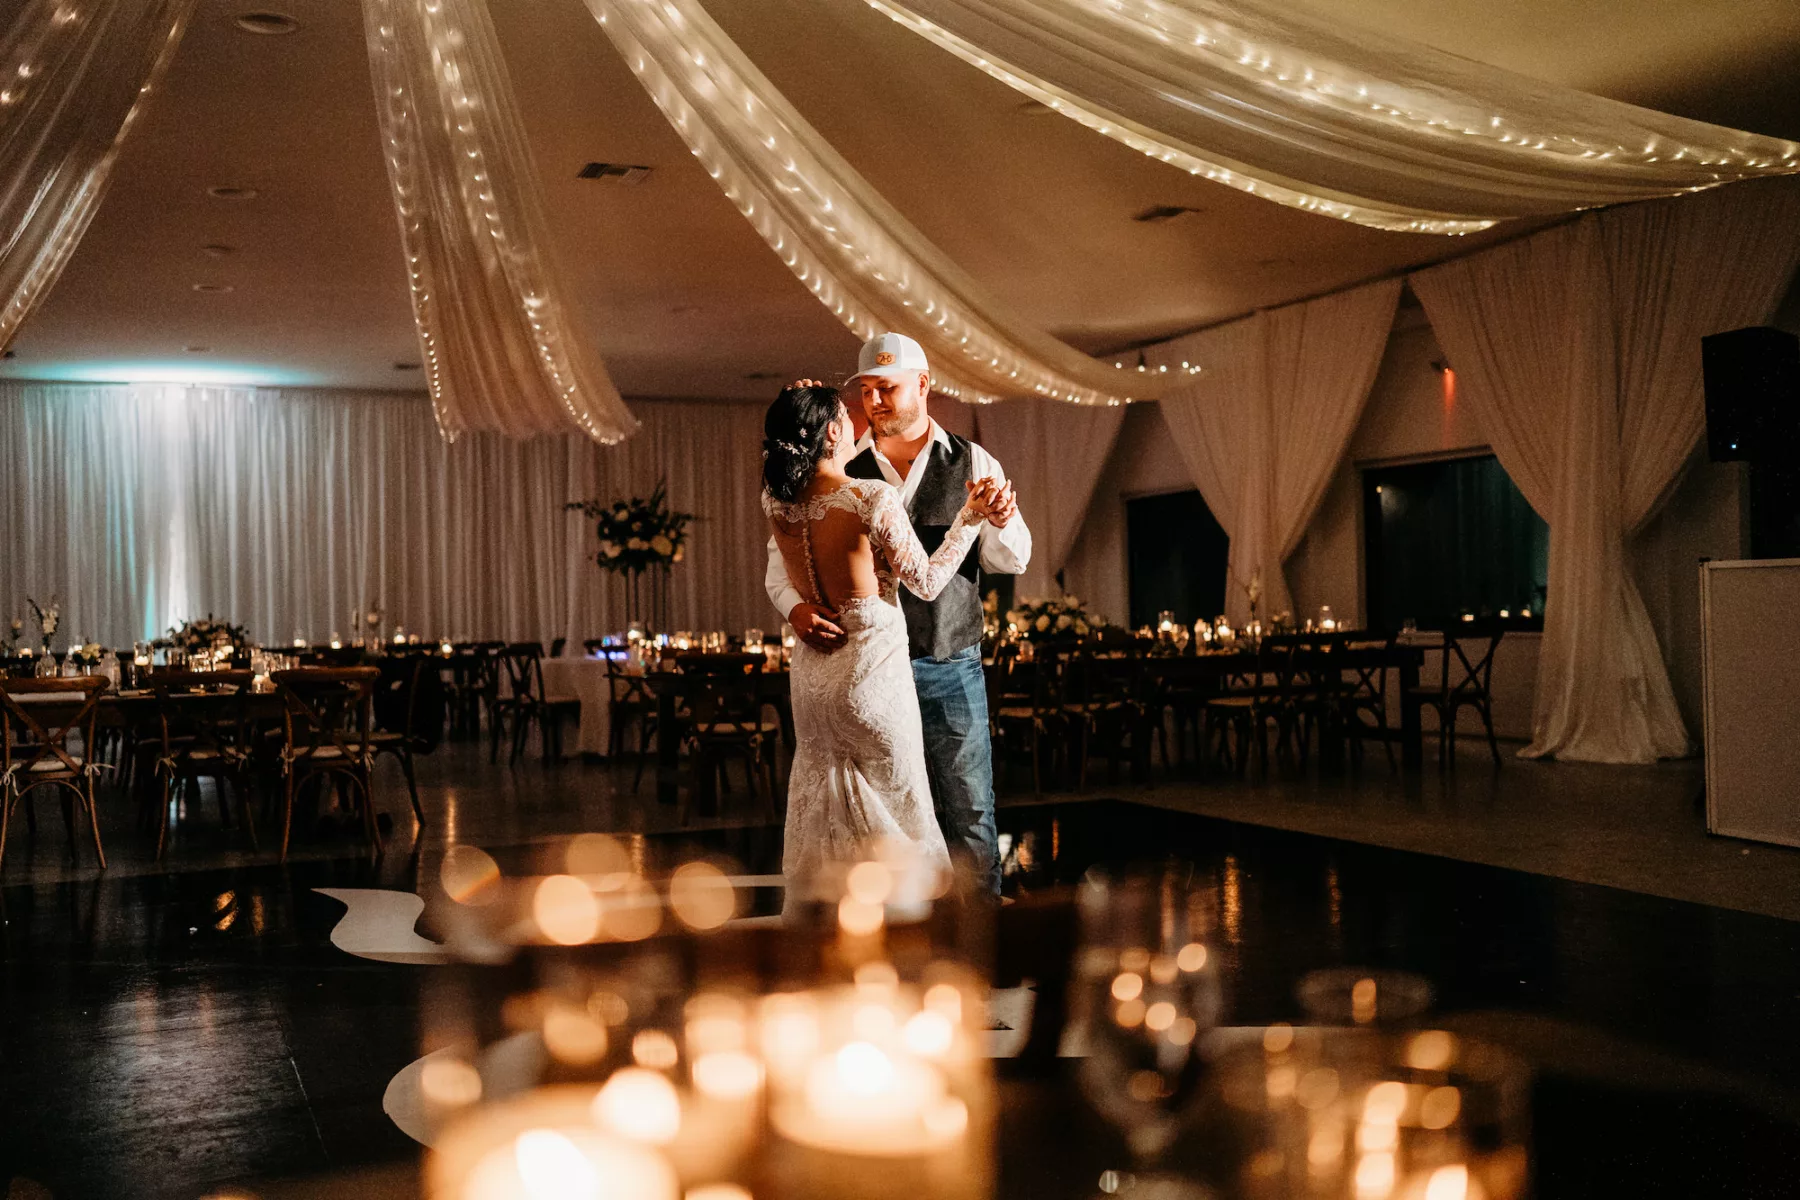 Bride and Groom Private Last Dance Wedding Portrait | Tampa Bay Event Venue Simpson Lakes | DJ Events Done Right Tampa Bay